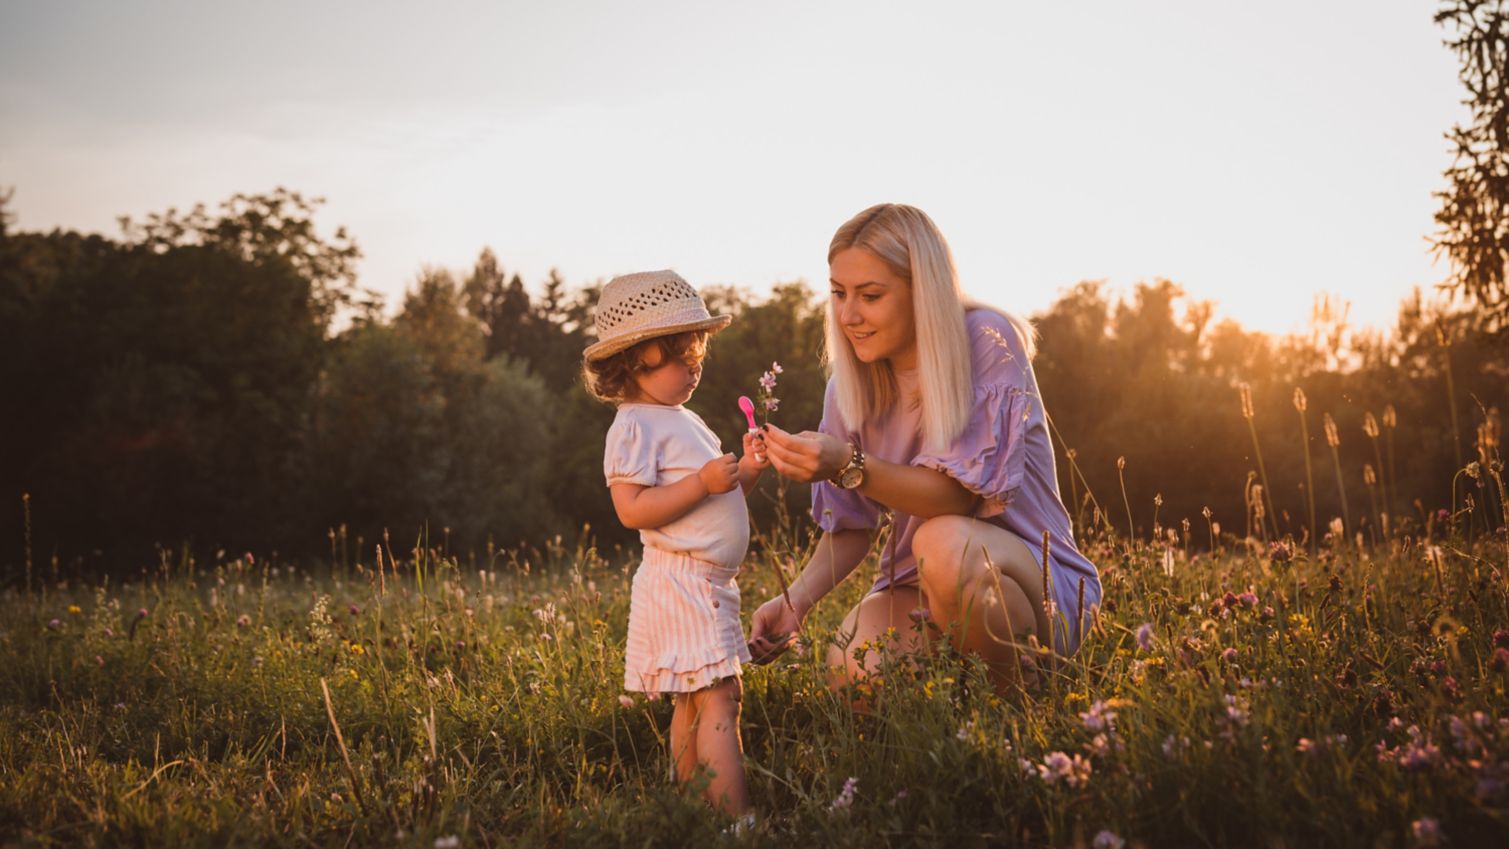 Mom picks wild flowers with young child in a field